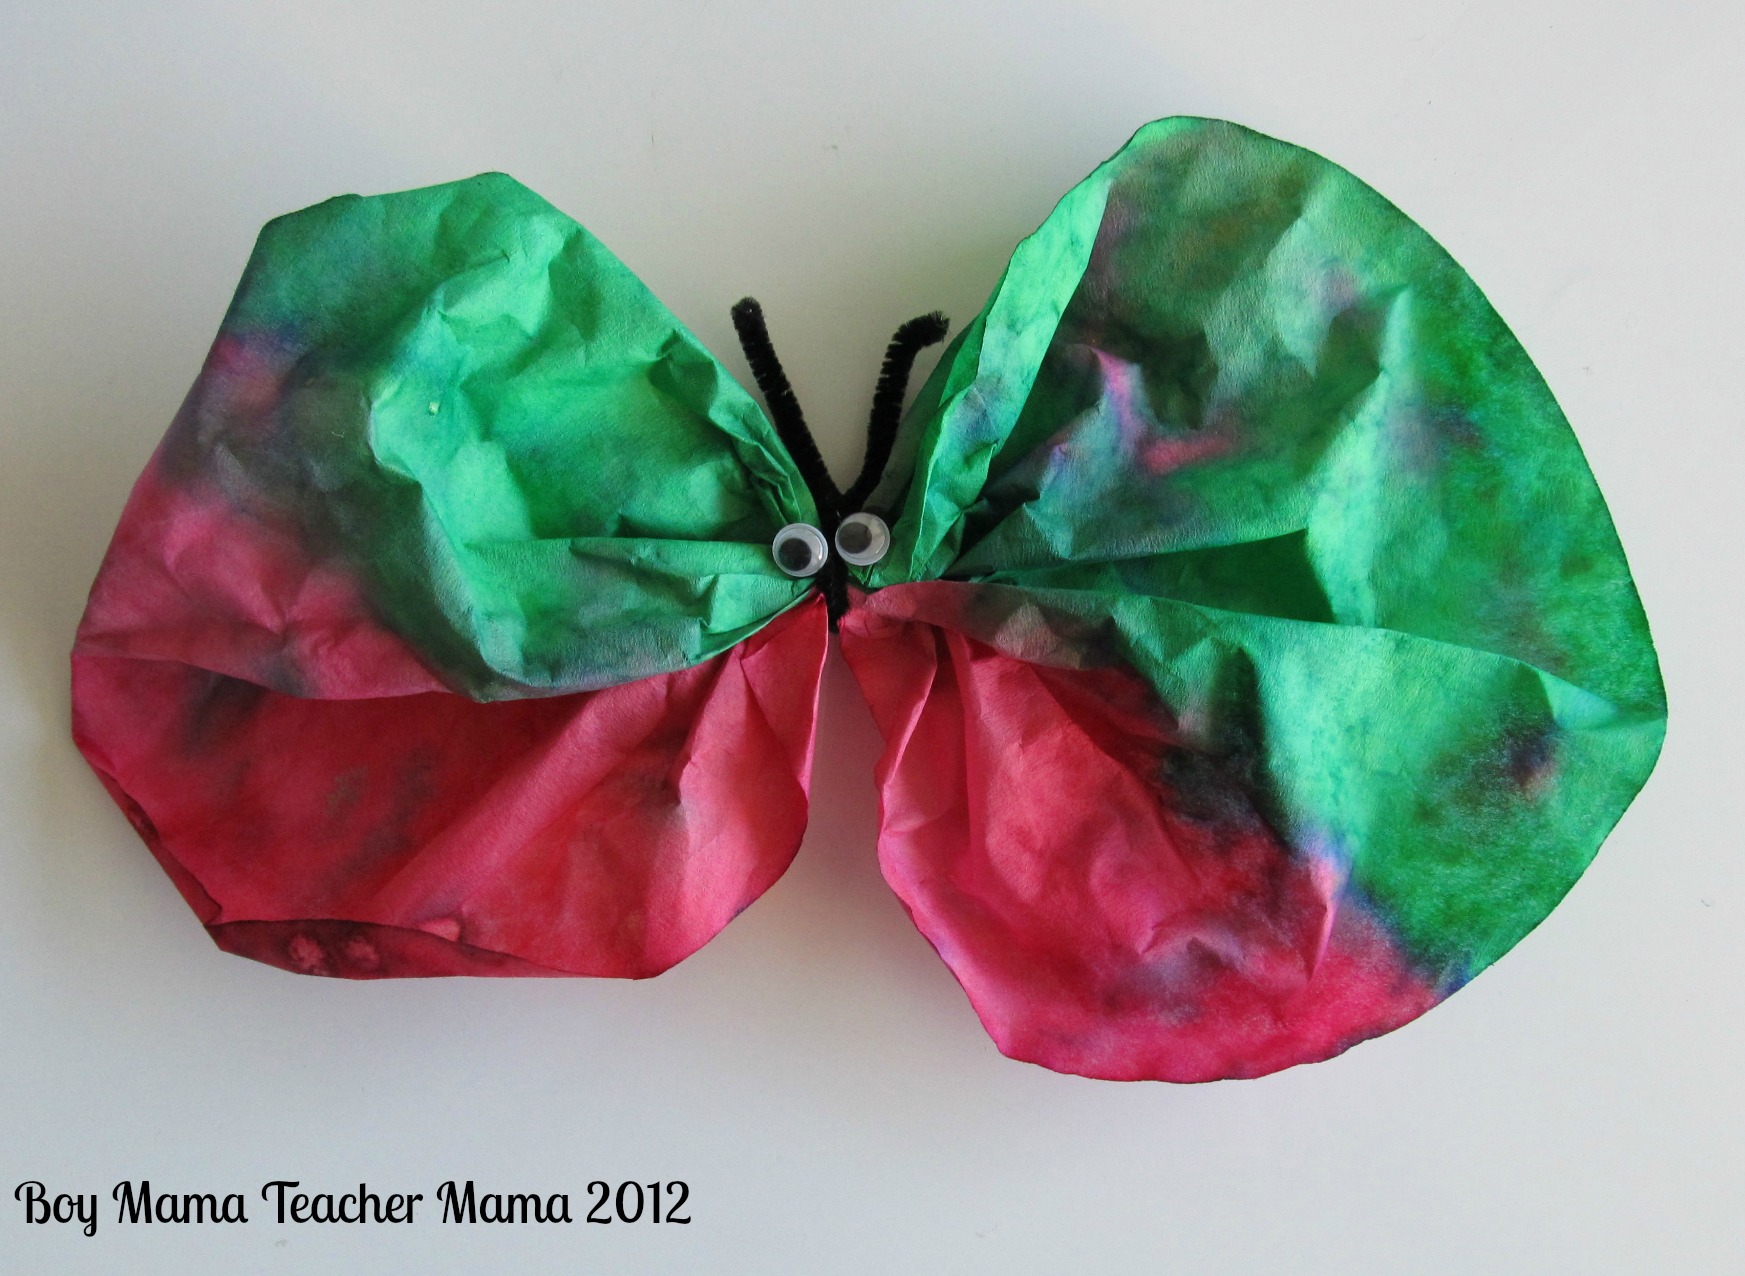 Coffee Filter Butterfly Crafts for Preschoolers - Red Ted Art